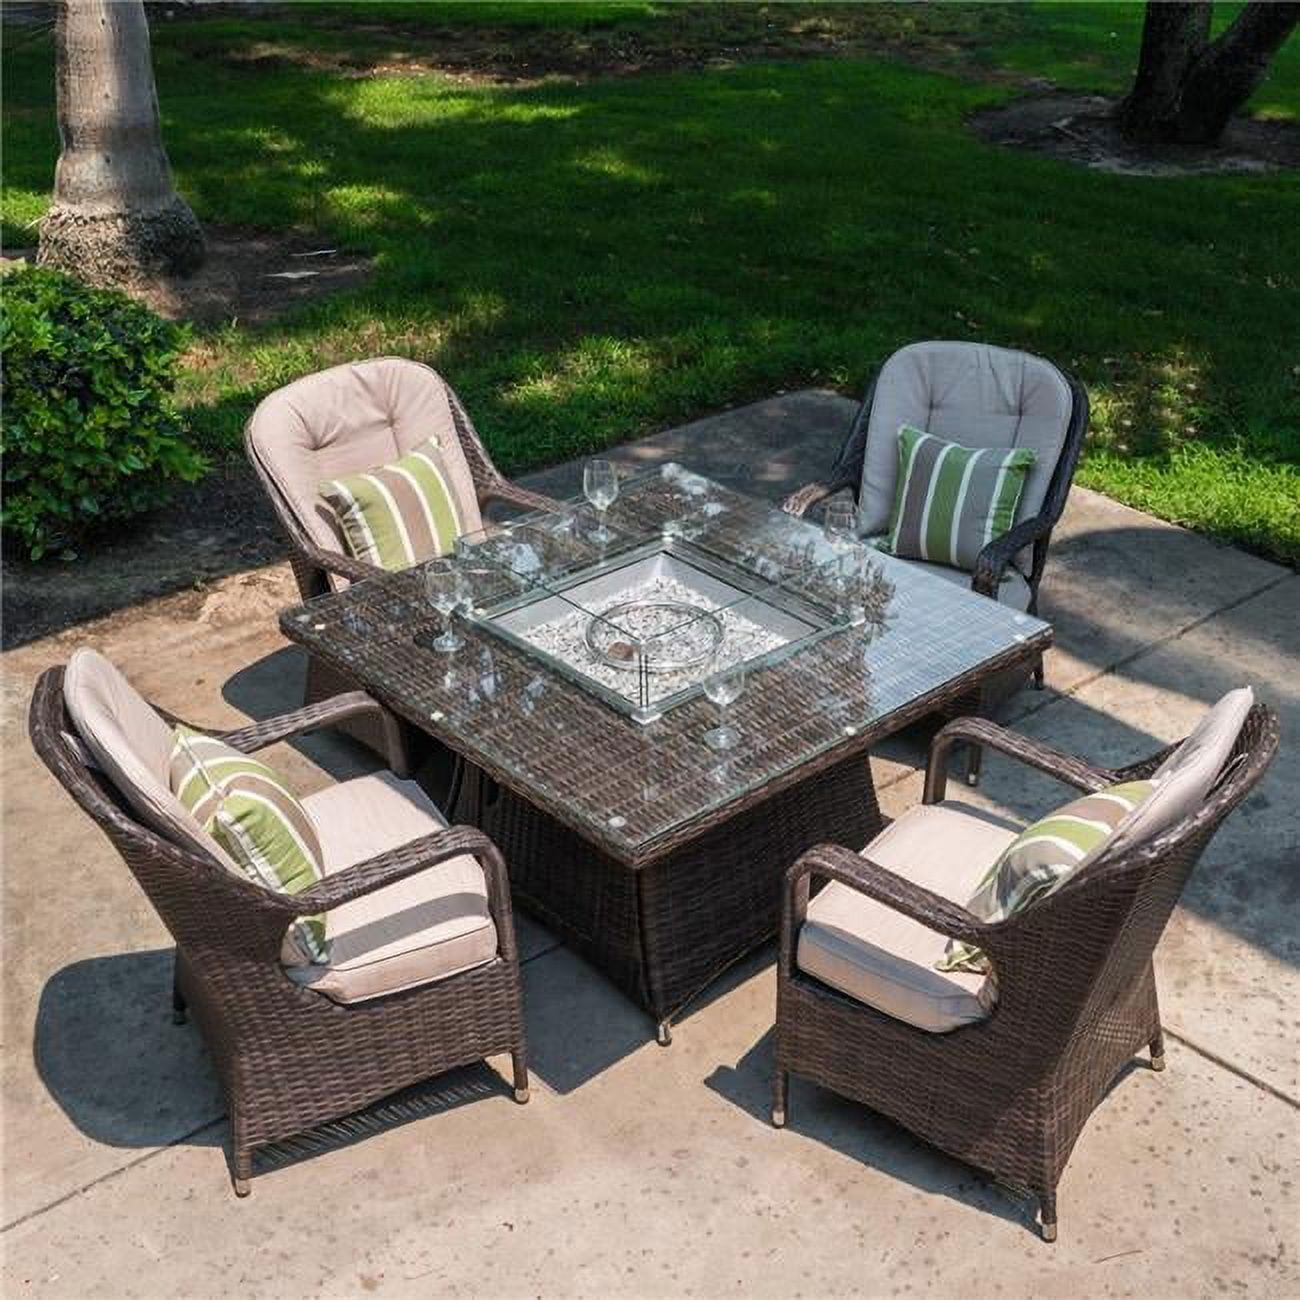 Pag-1104 5 Piece Outdoor Pe Rattan Wicker Patio Gas Fire Pit Square Table Set With Arm Chairs, Brown